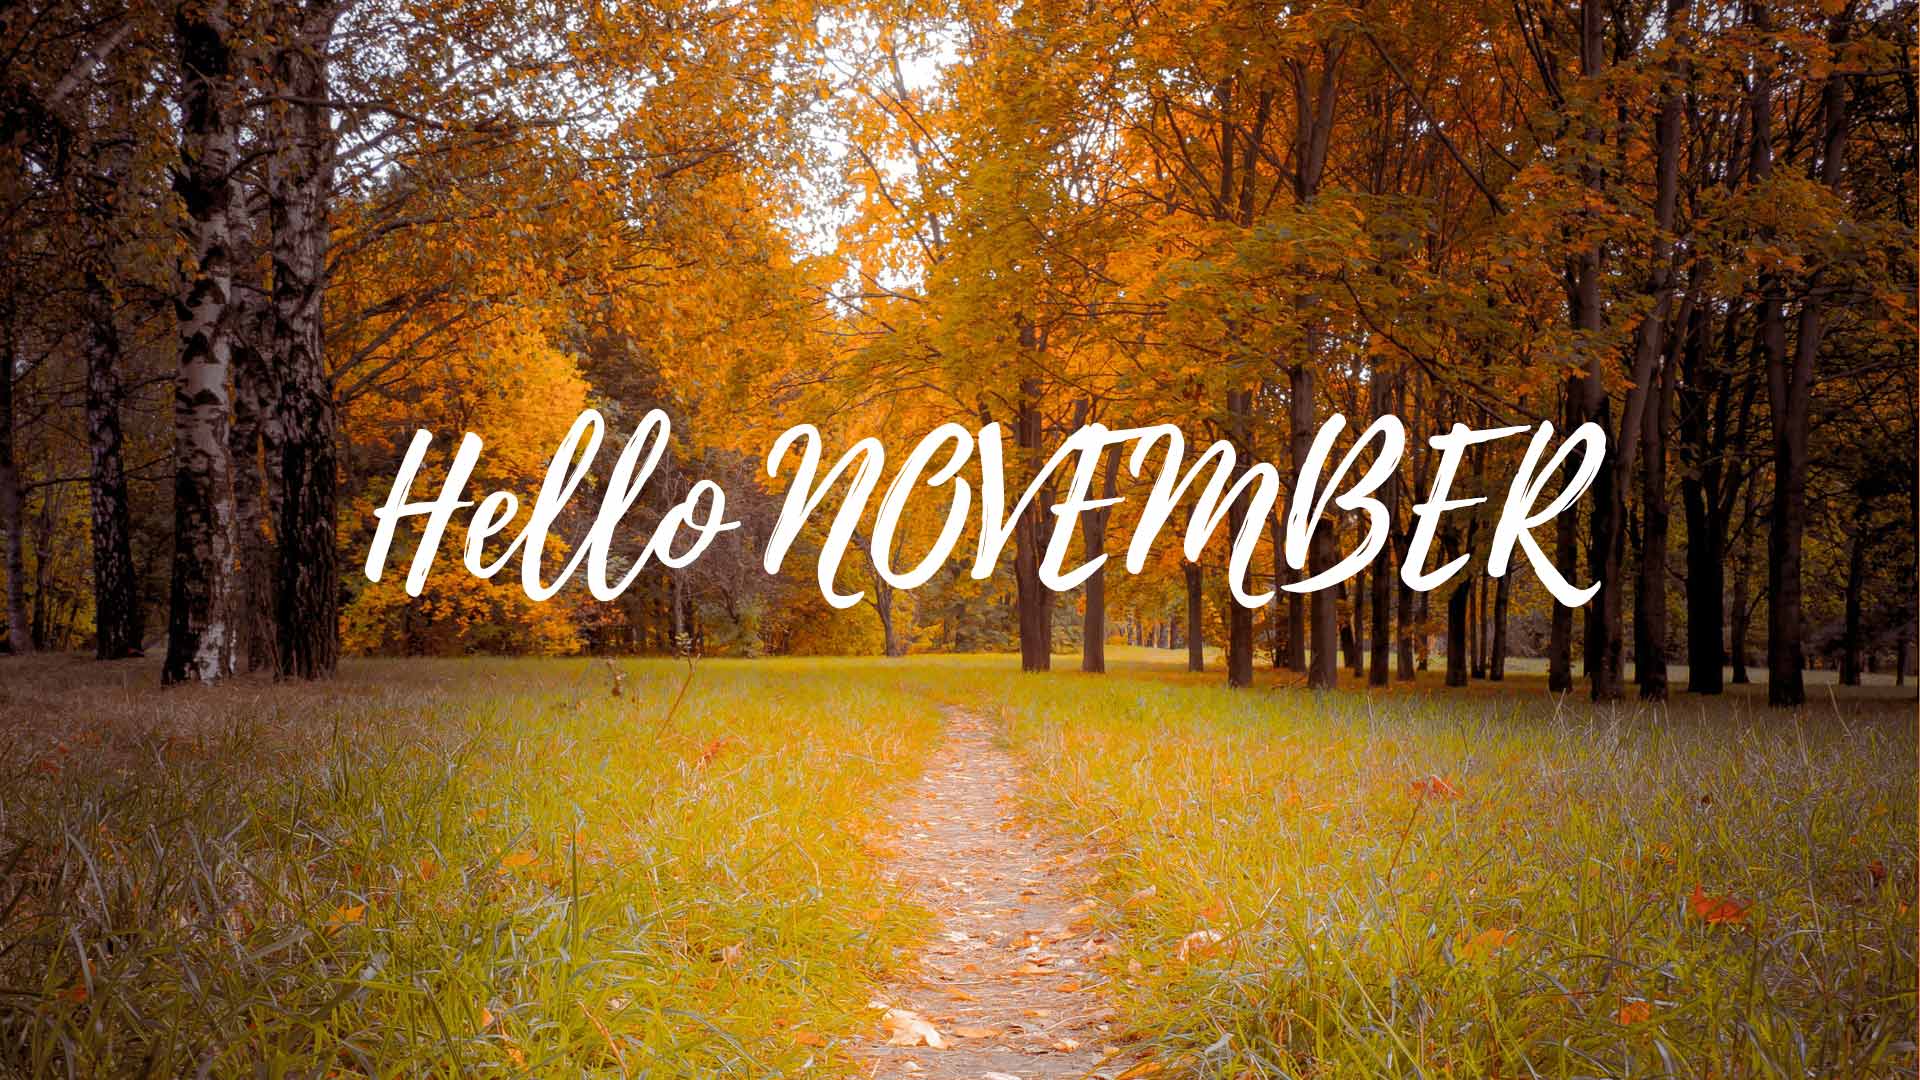 Hello November wallpaper background 2020 for computer free download